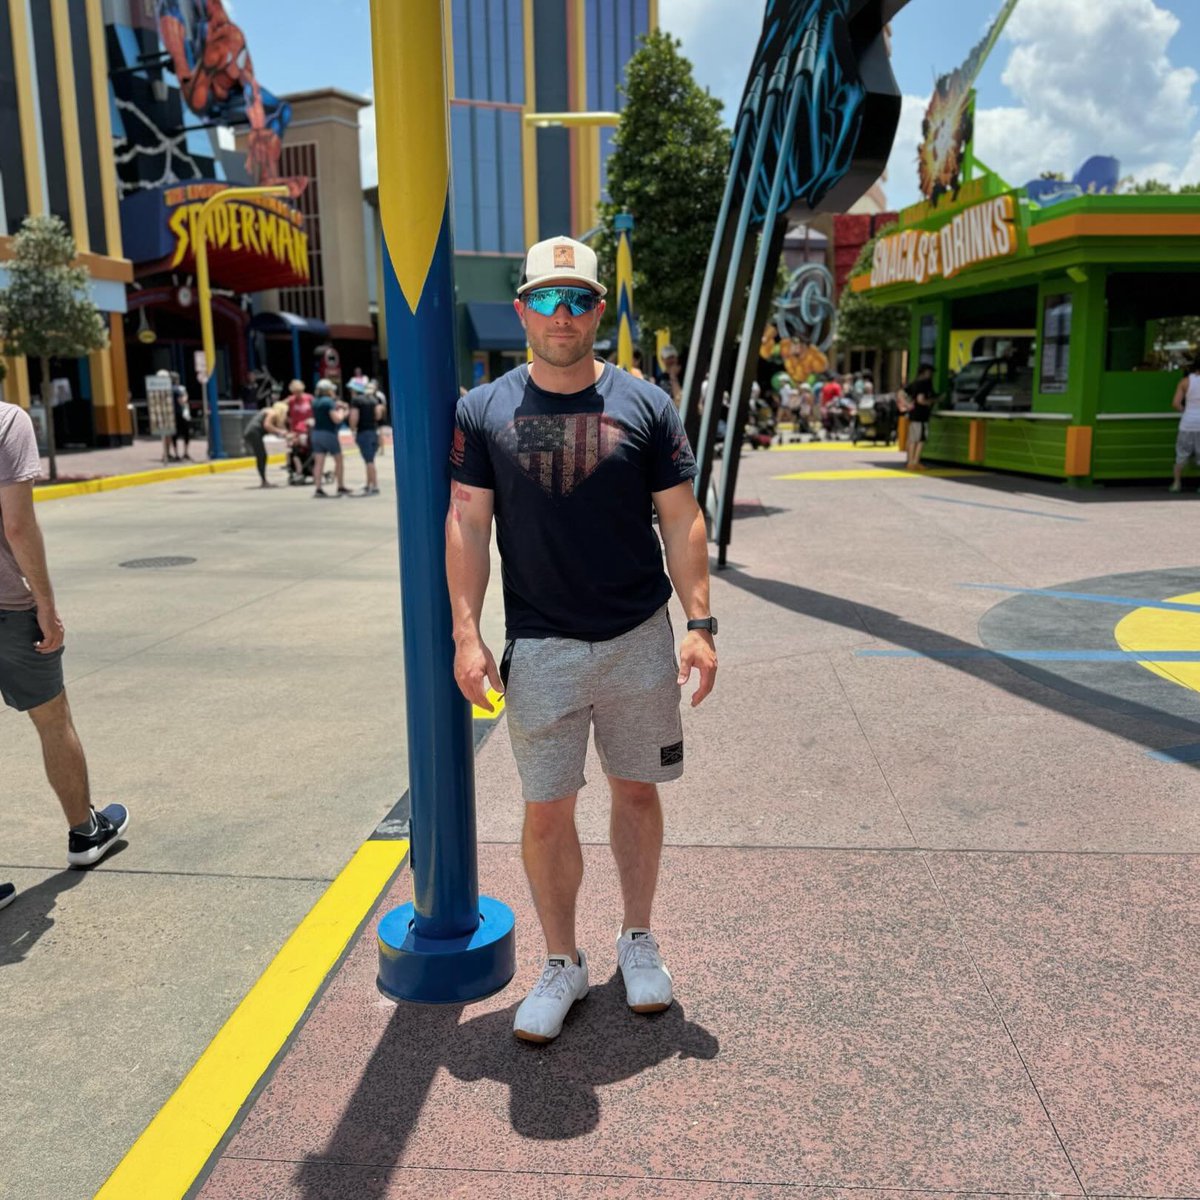 I turned 31 years old today and got to live out my inner child going to Universal Studios for the first time. I’ve been doing a lot of reflecting and if I could describe my life in one word it would be blessed. Through the good and bad, I’m thankful to God for another year.